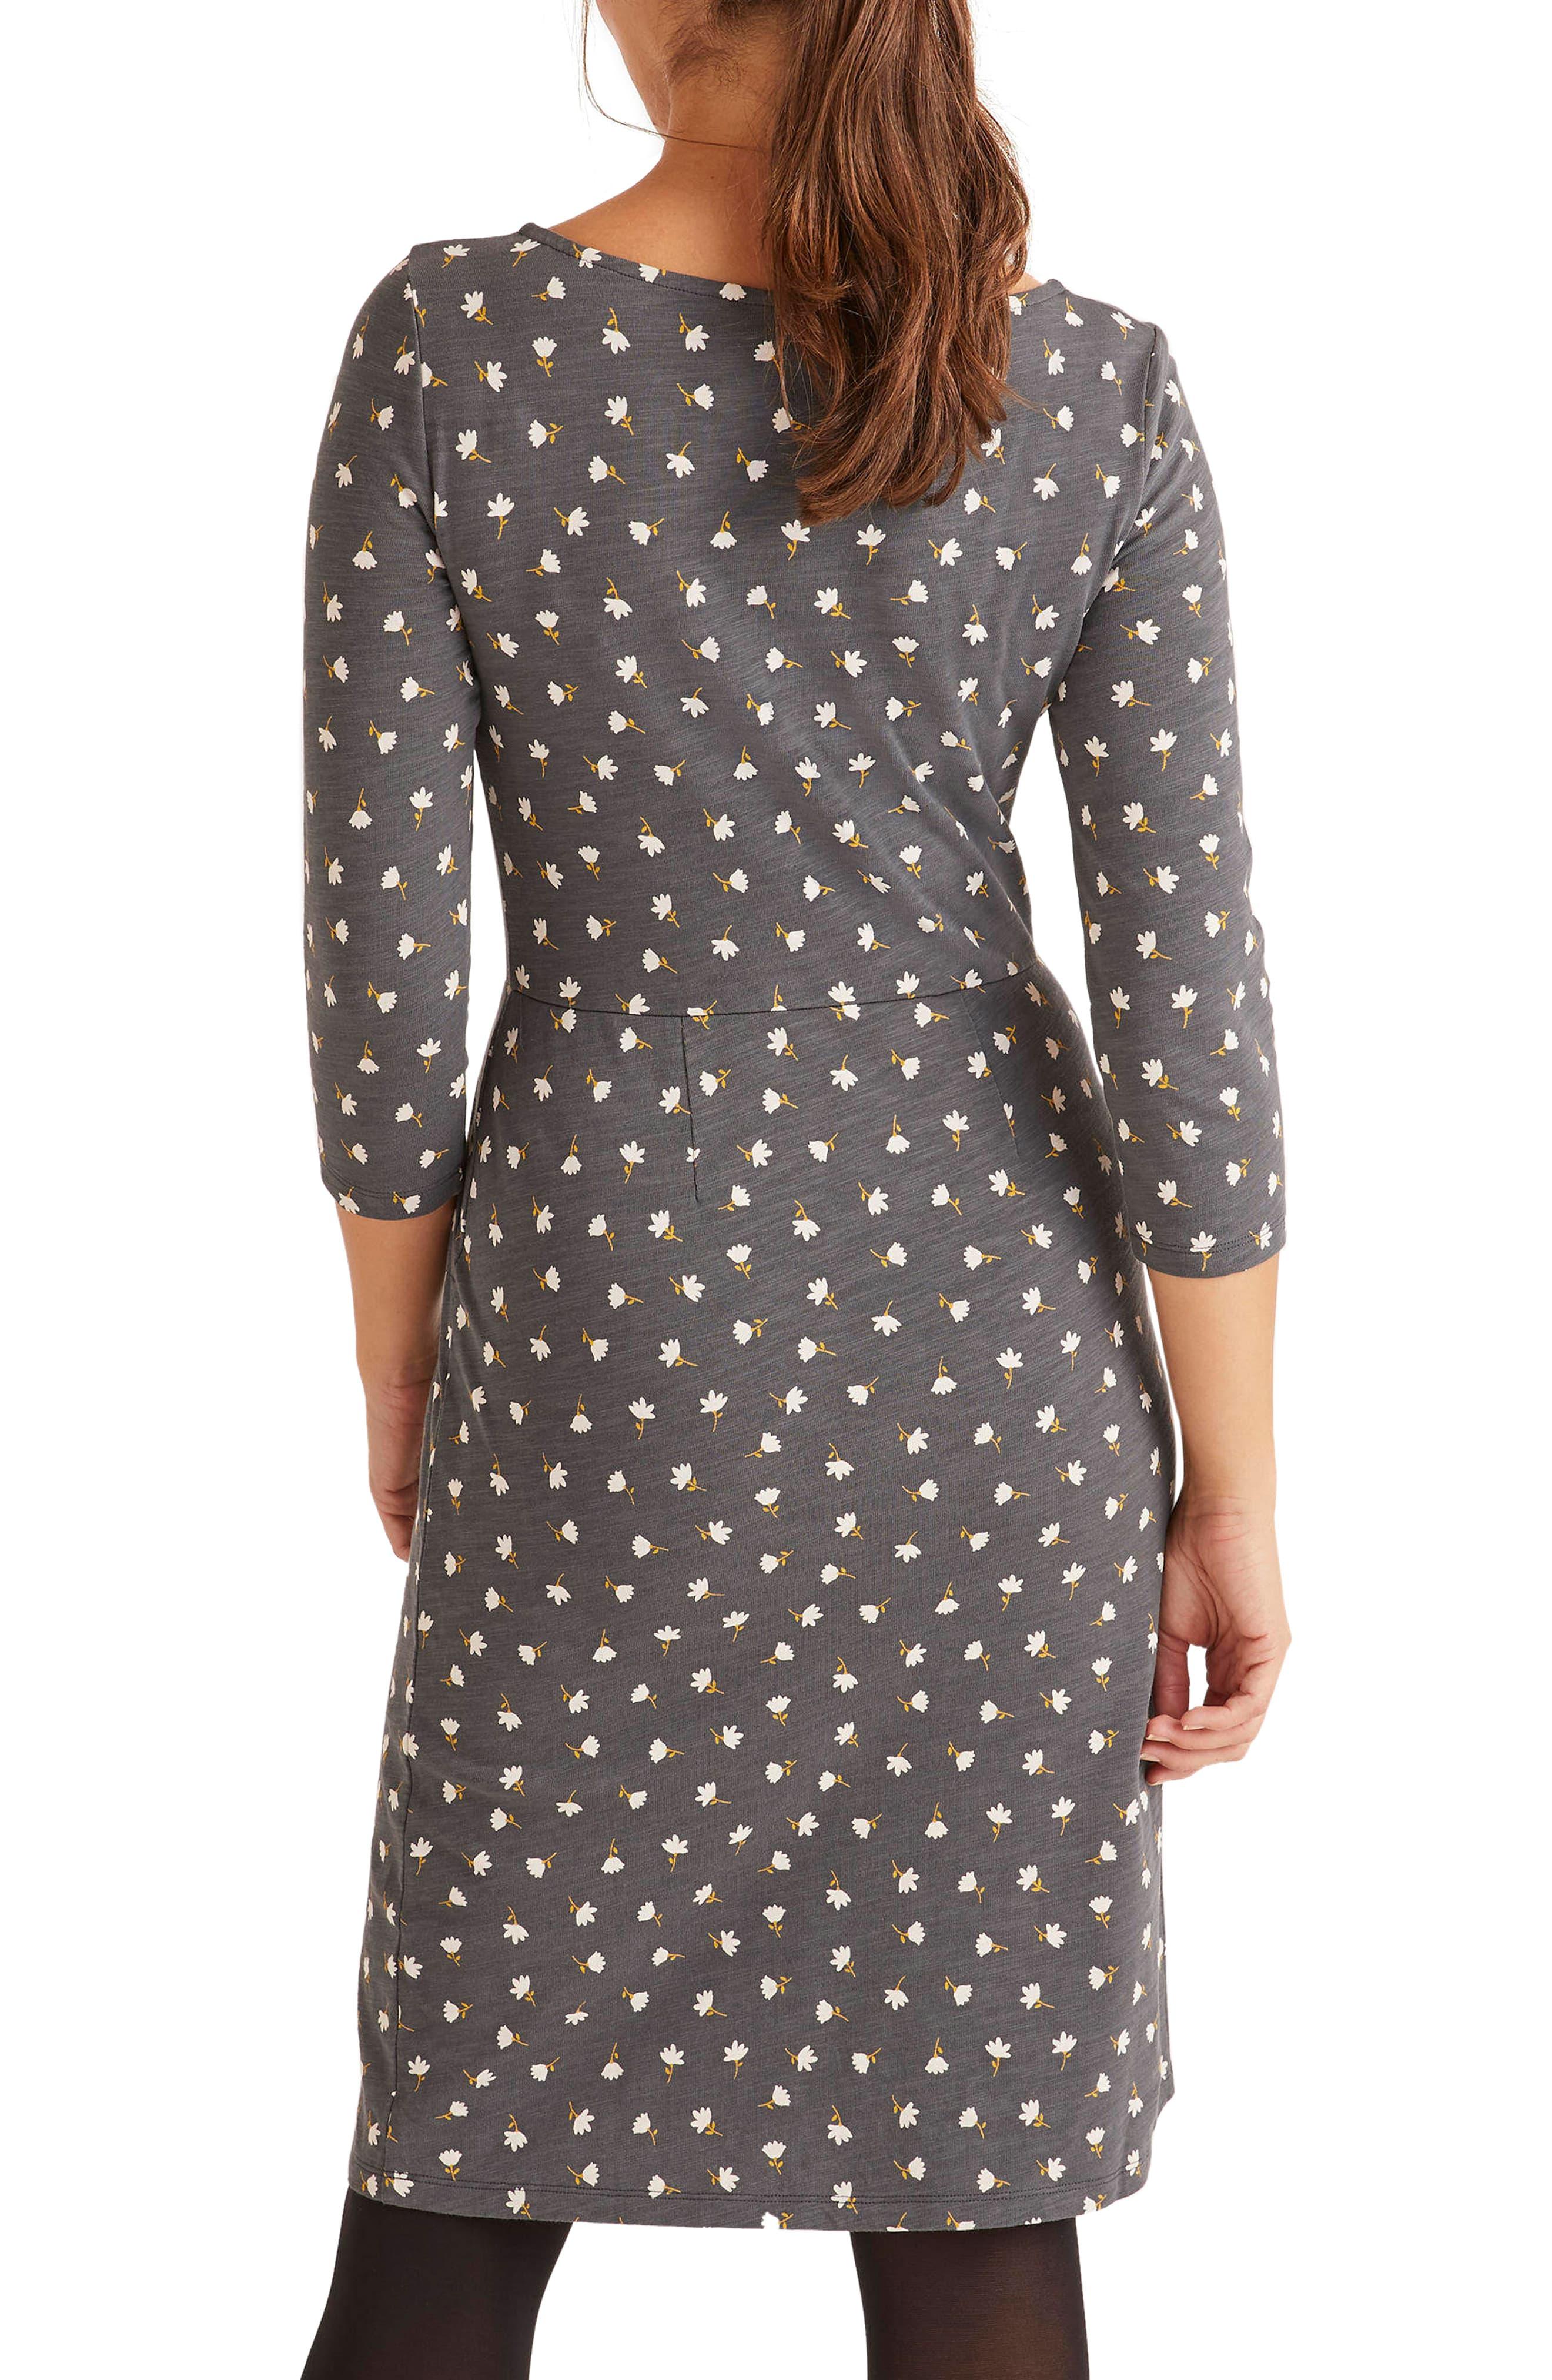 Boden Cotton Penny Floral Jersey Dress 